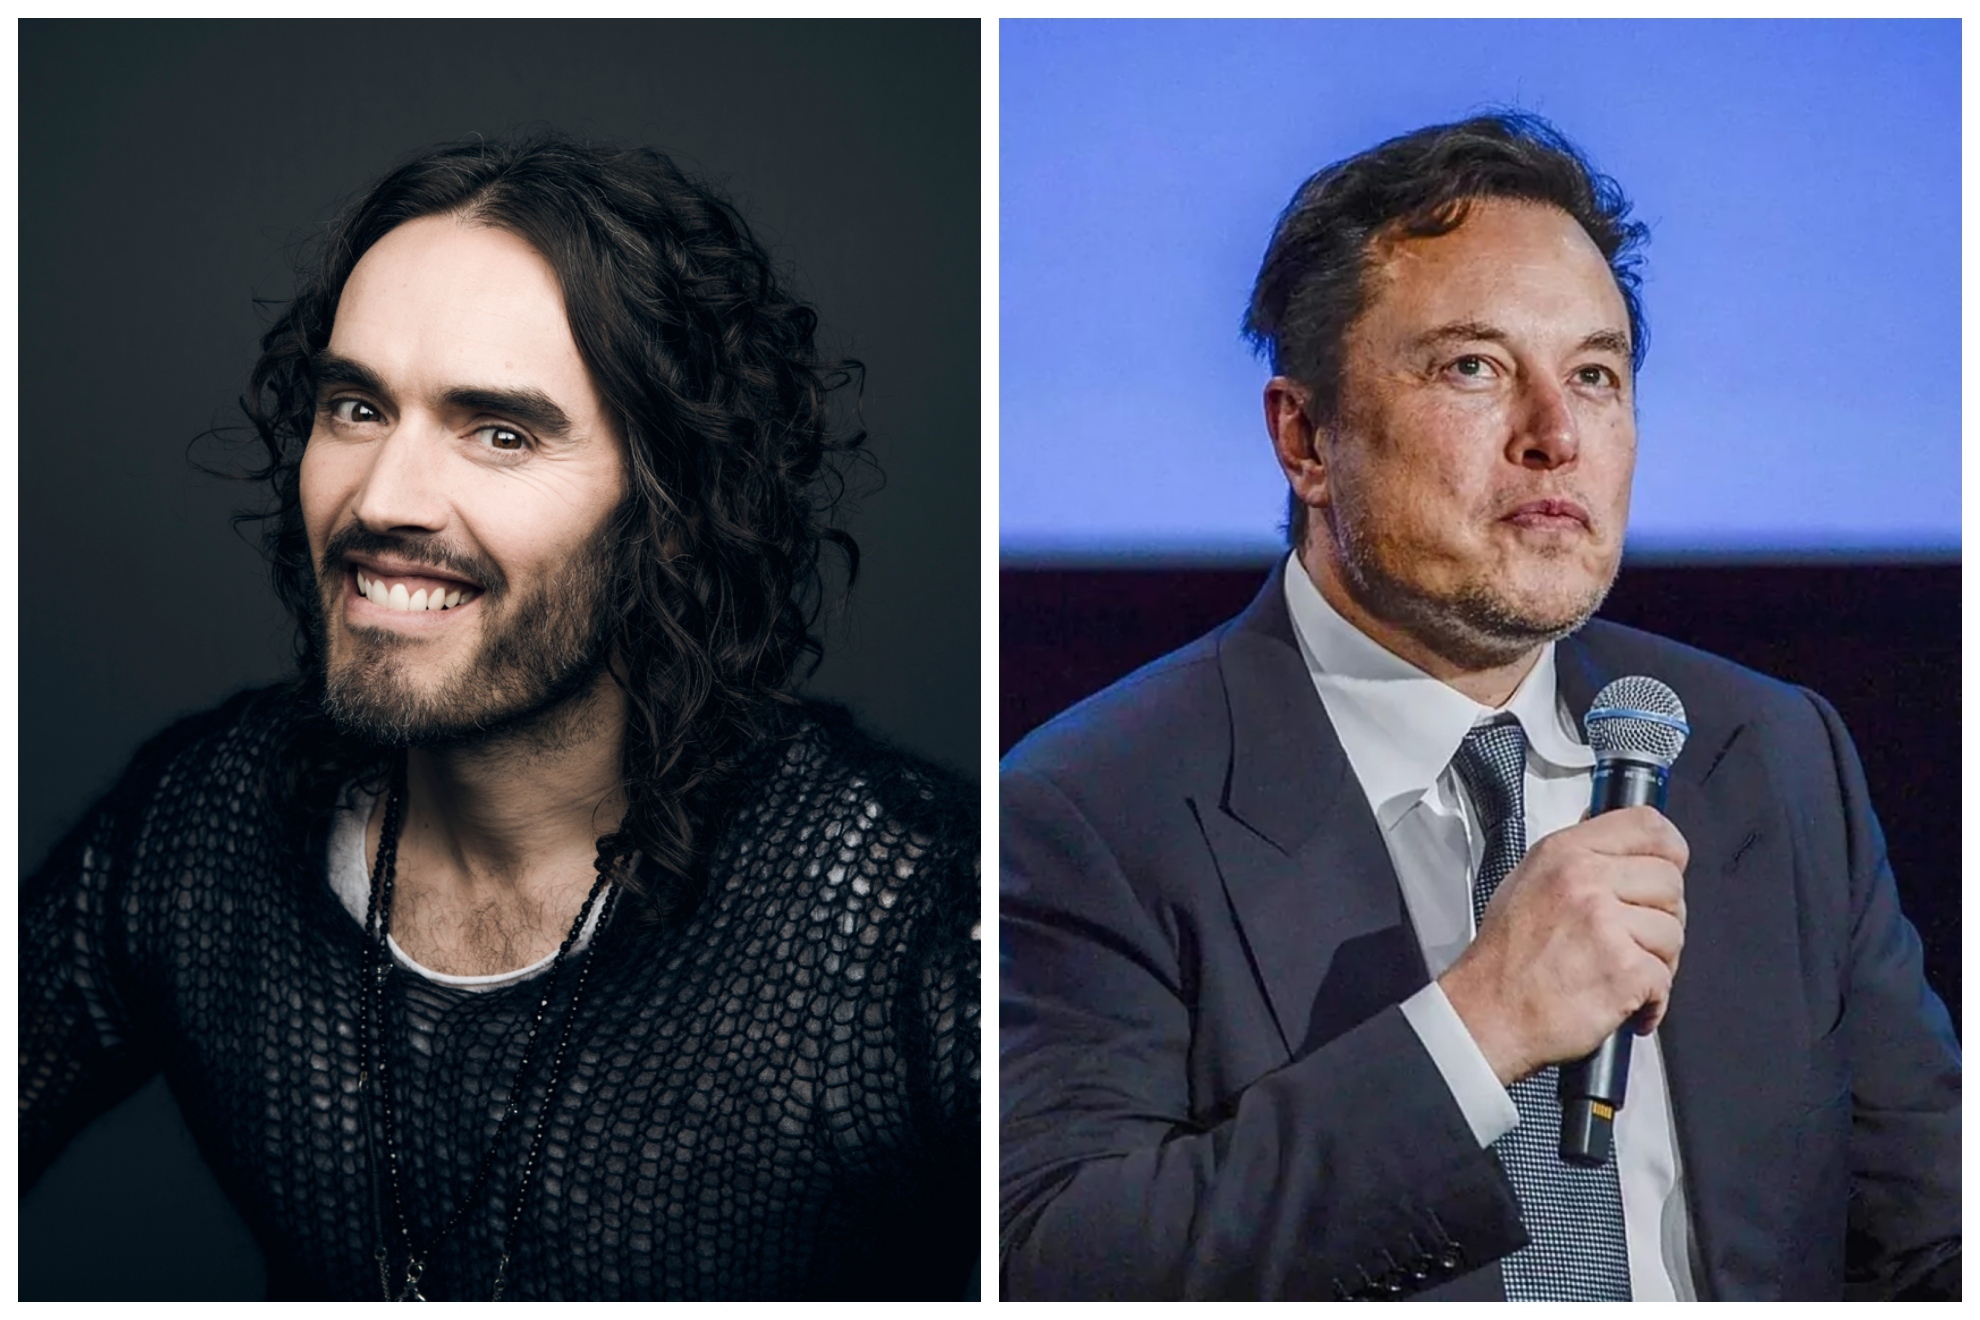 Russell Brand and Elon Musk